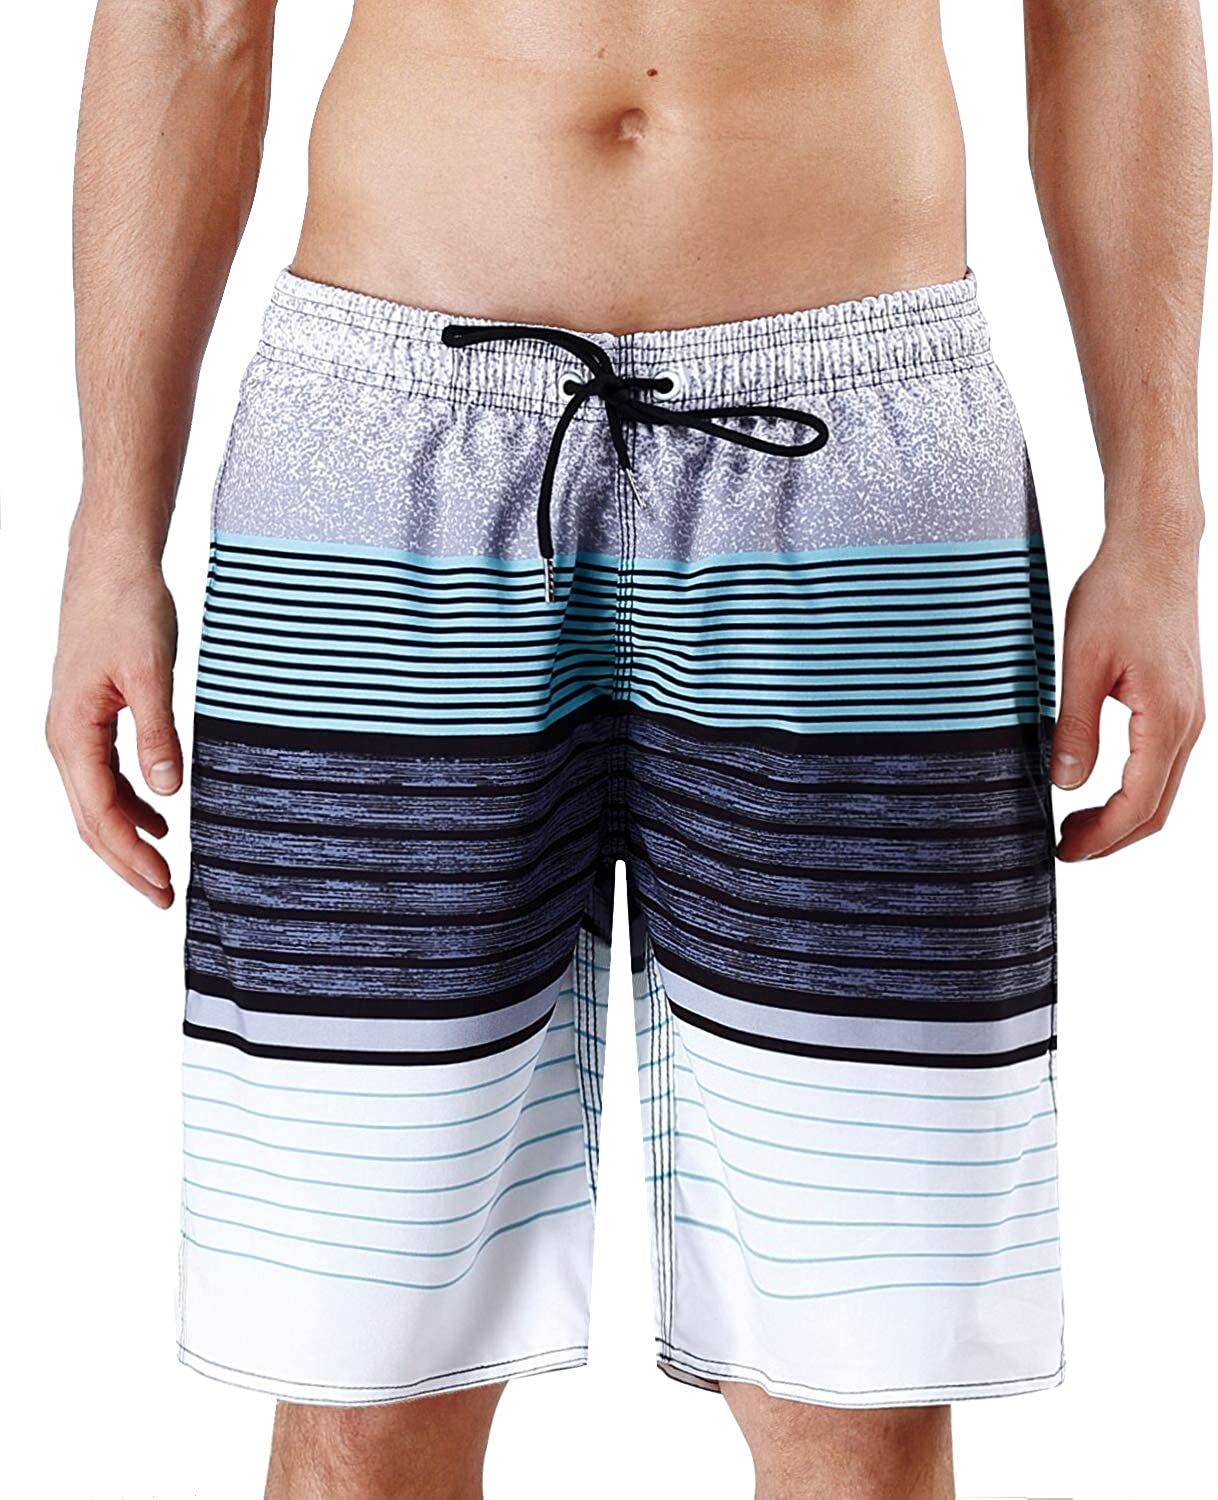 MILANKERR Mens Swim Trunk Swimming Shorts with Pockets 